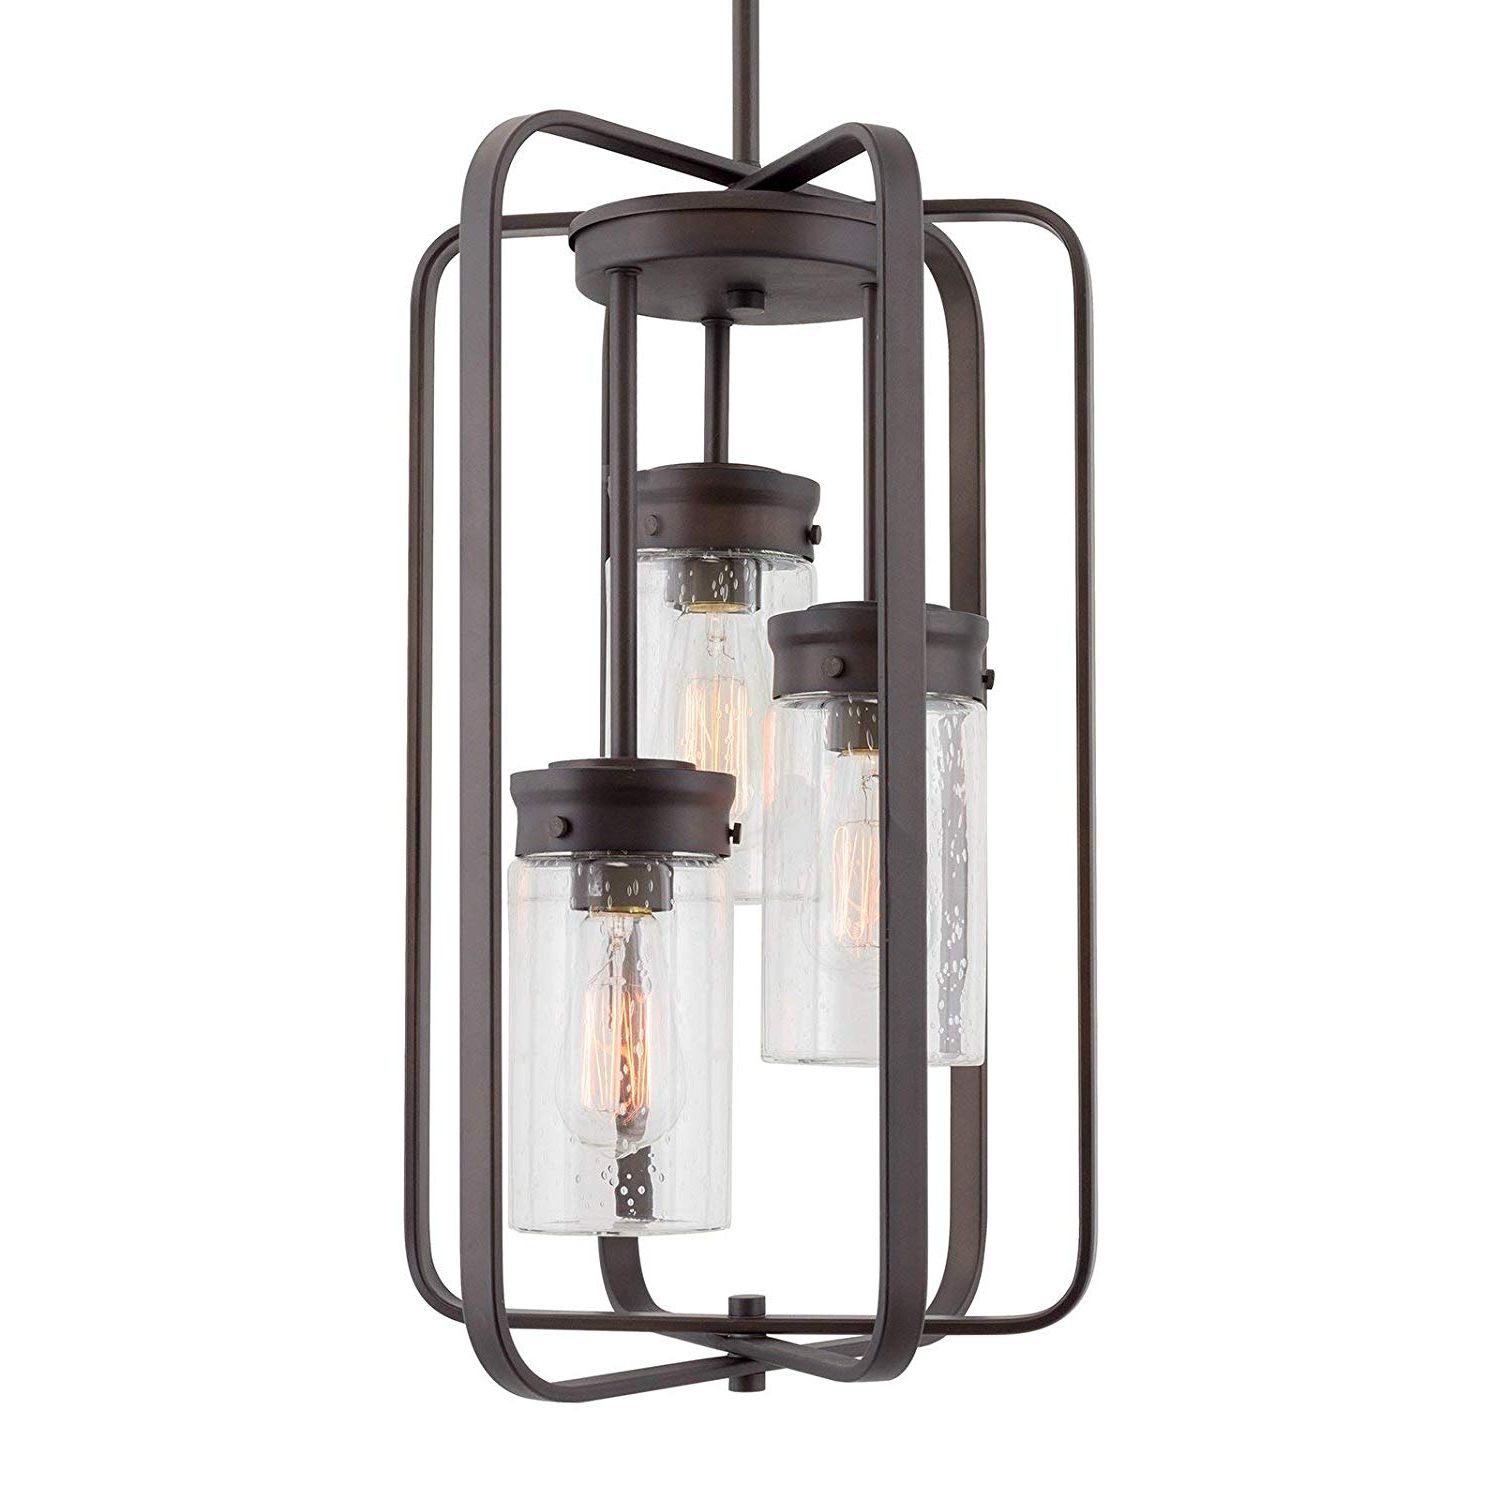 Kira Home Augustine 20.5" Modern 3 Light Large Ceiling Pendant Chandelier,  Free Swinging Arms + Cylinder Glass Shades, Oil Rubbed Bronze Finish Intended For Well Known 3 Light Lantern Cylinder Pendants (Photo 24 of 25)